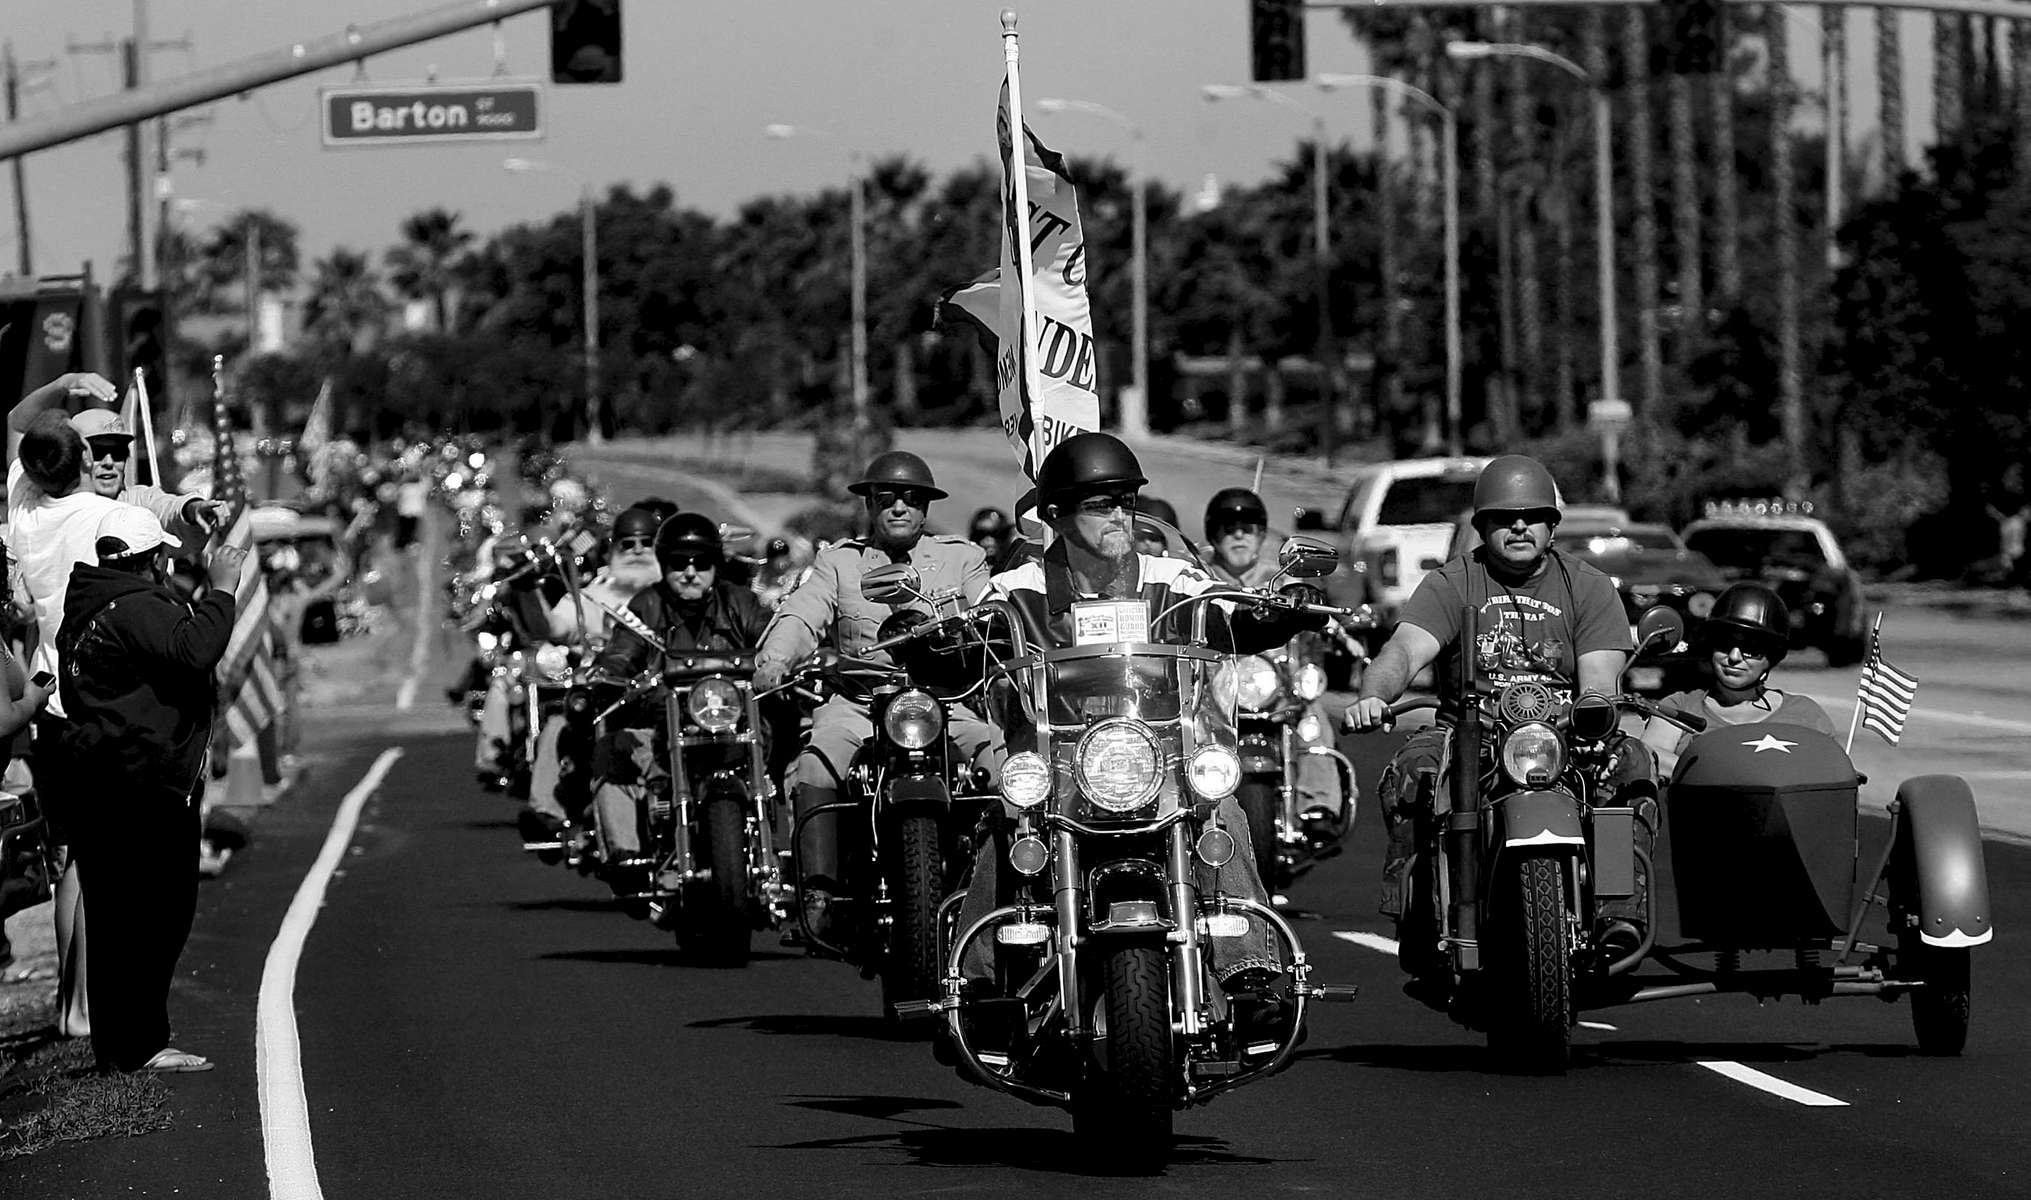 Members of the West Coast Thunder XII head to Riverside National Cemetery, the second largest site dedicated to the interment of U.S. military personel. About 7,000 riders participated in the ride on Memorial Day in Riverside, Calif., to honor veterans who had died. (The Press-Enterprise/ Mark Zaleski)